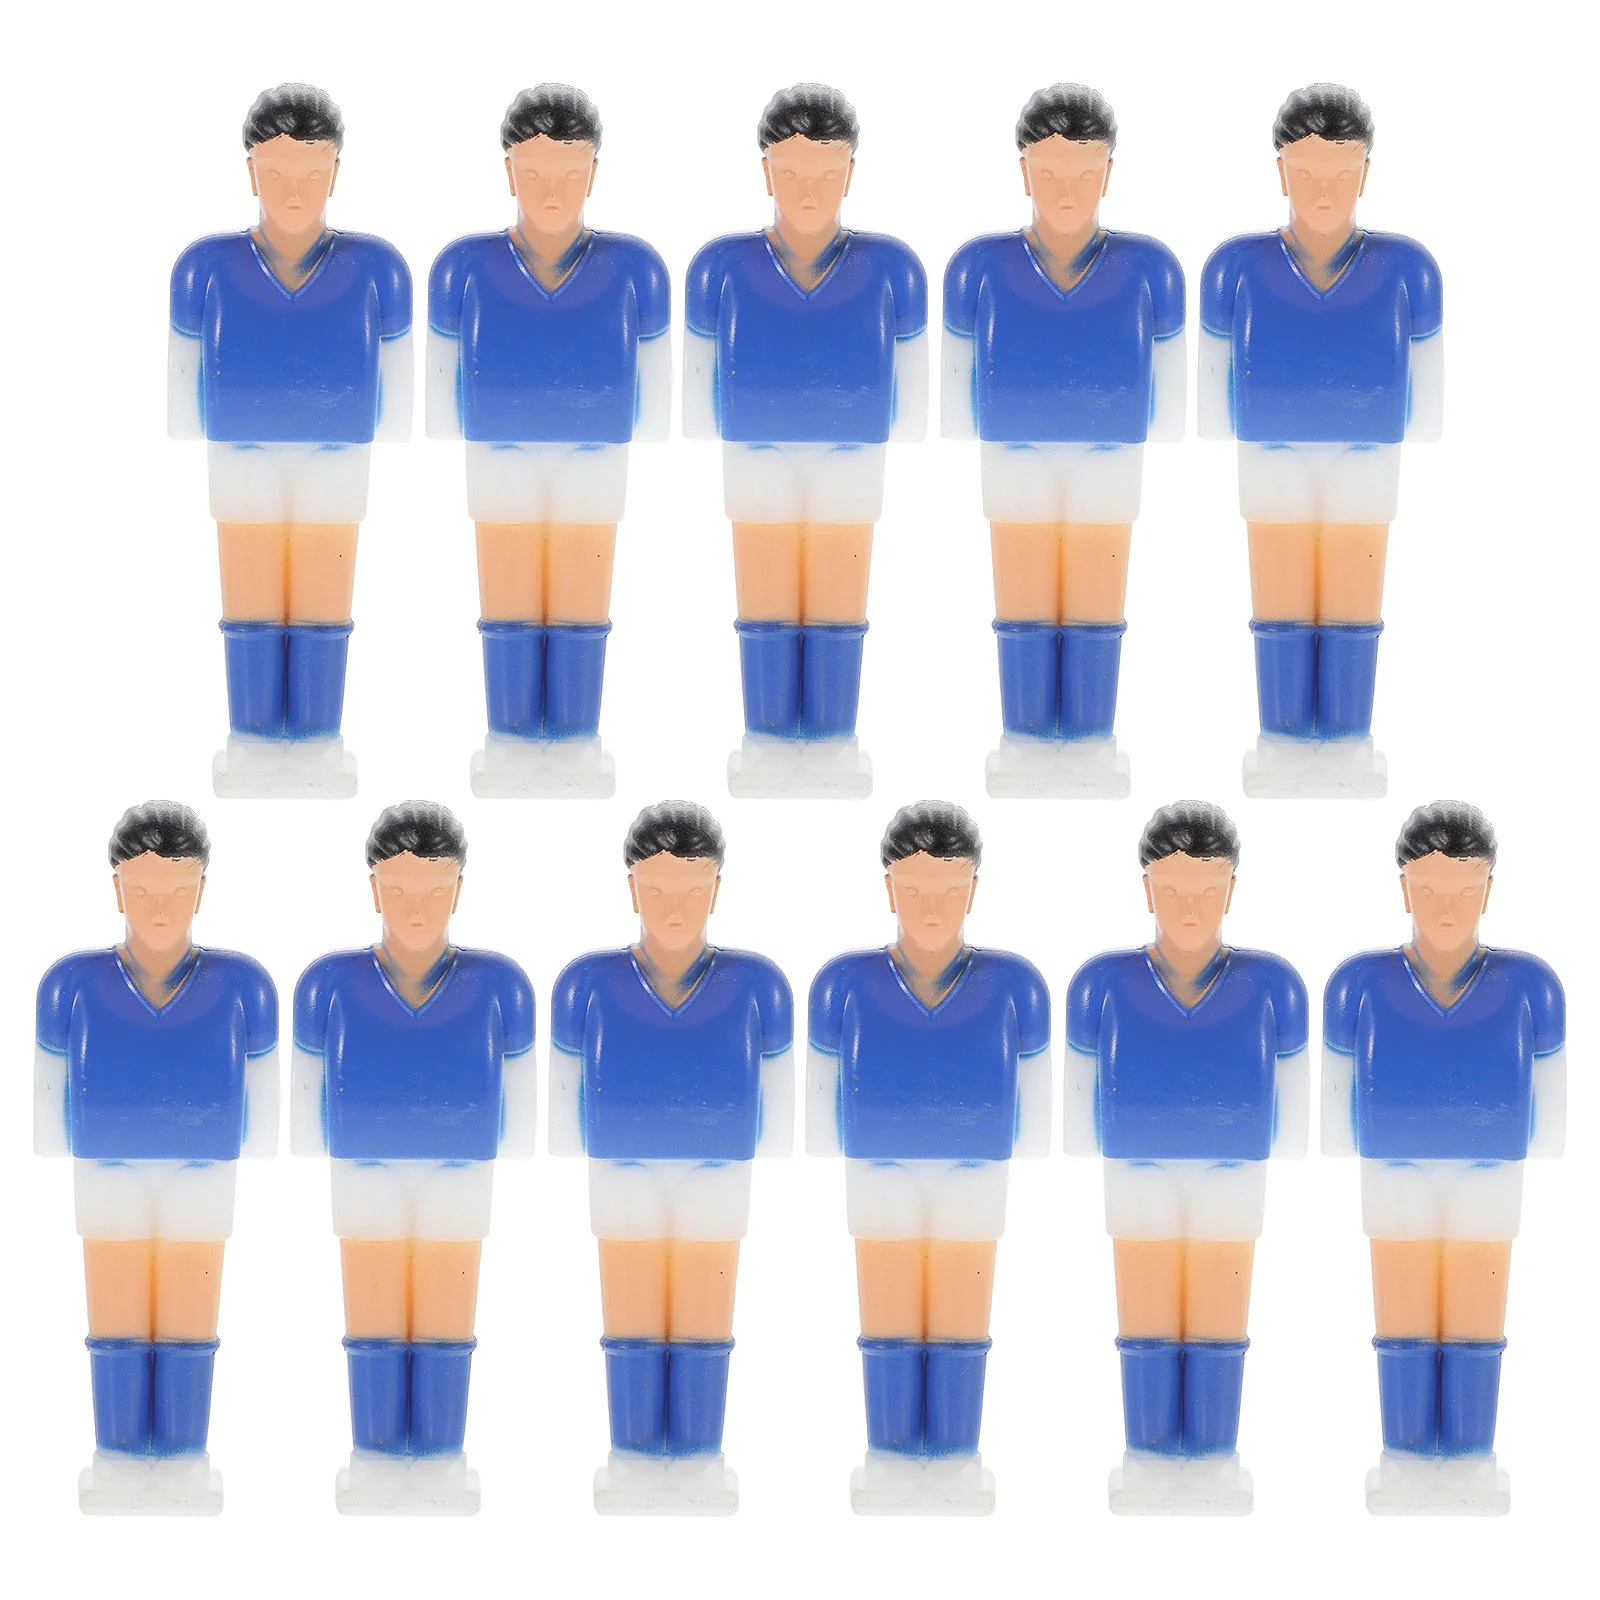 

11 Table Soccer Men Table Football Men Foosball Soccer Machine Replacement Dolls Tabletop Billiard Game Accessories for Dynamo